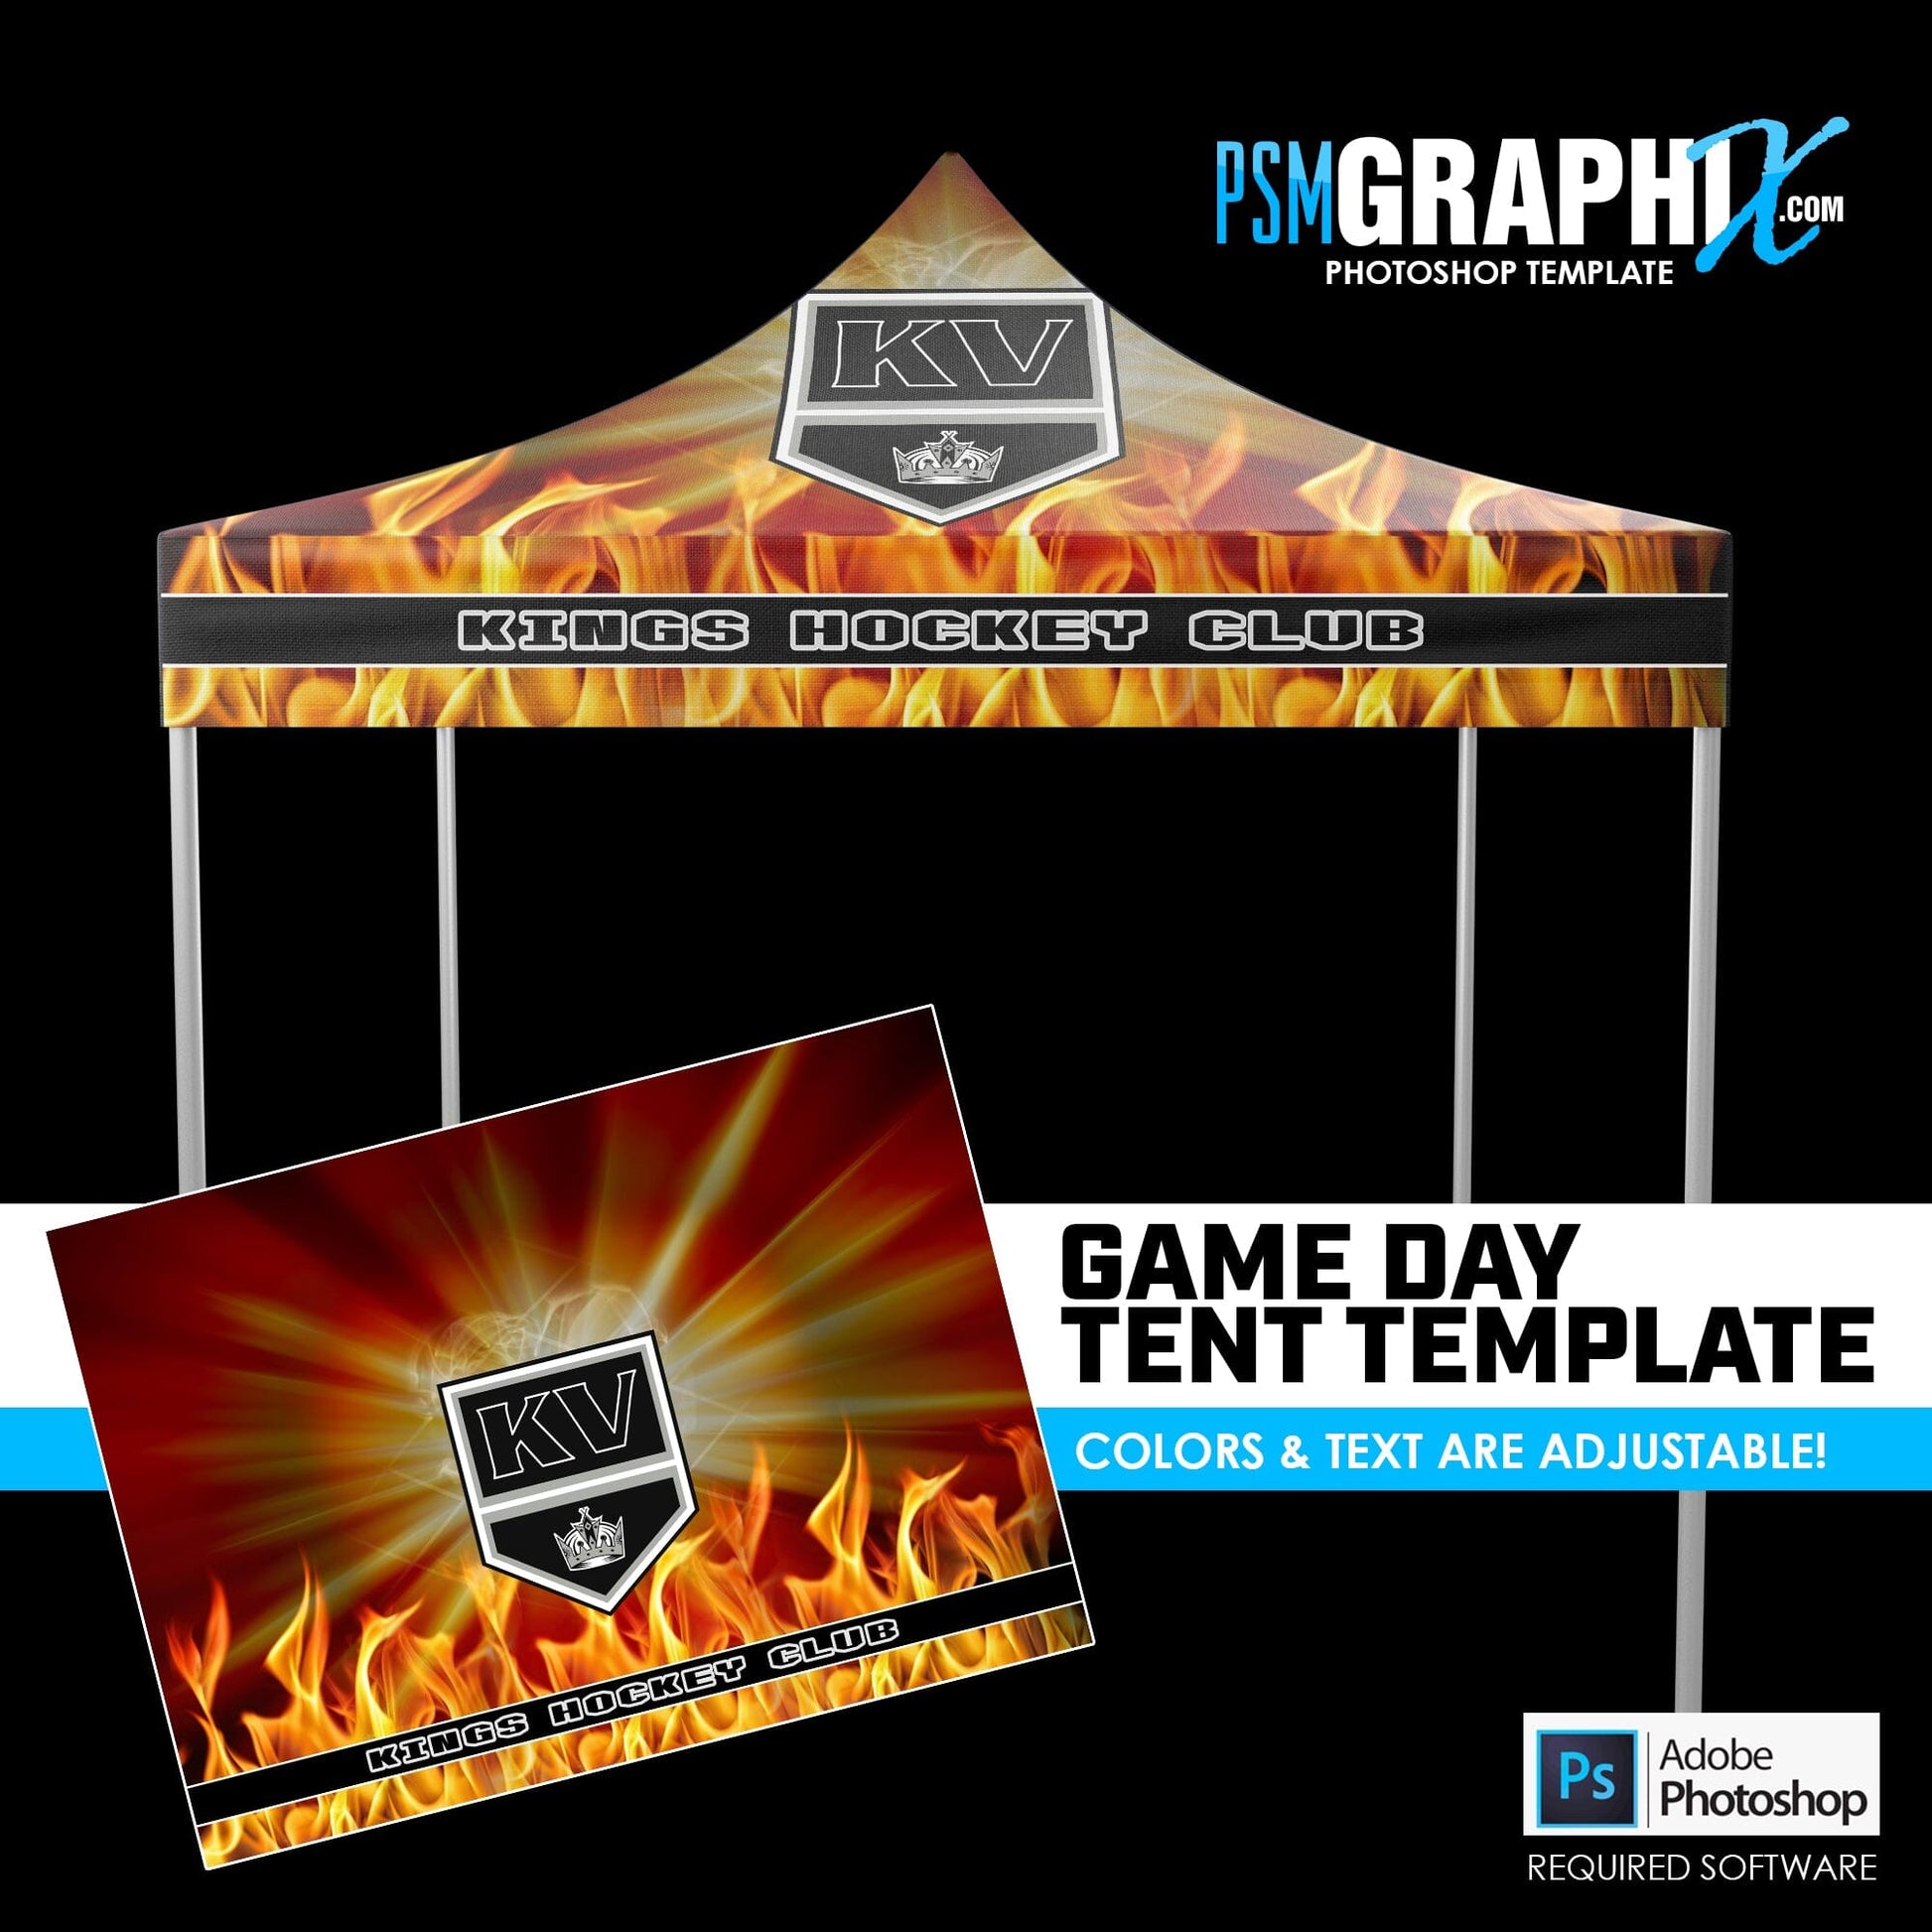 Burn V.1 - Game Day Photoshop Tent Template-Photoshop Template - PSMGraphix